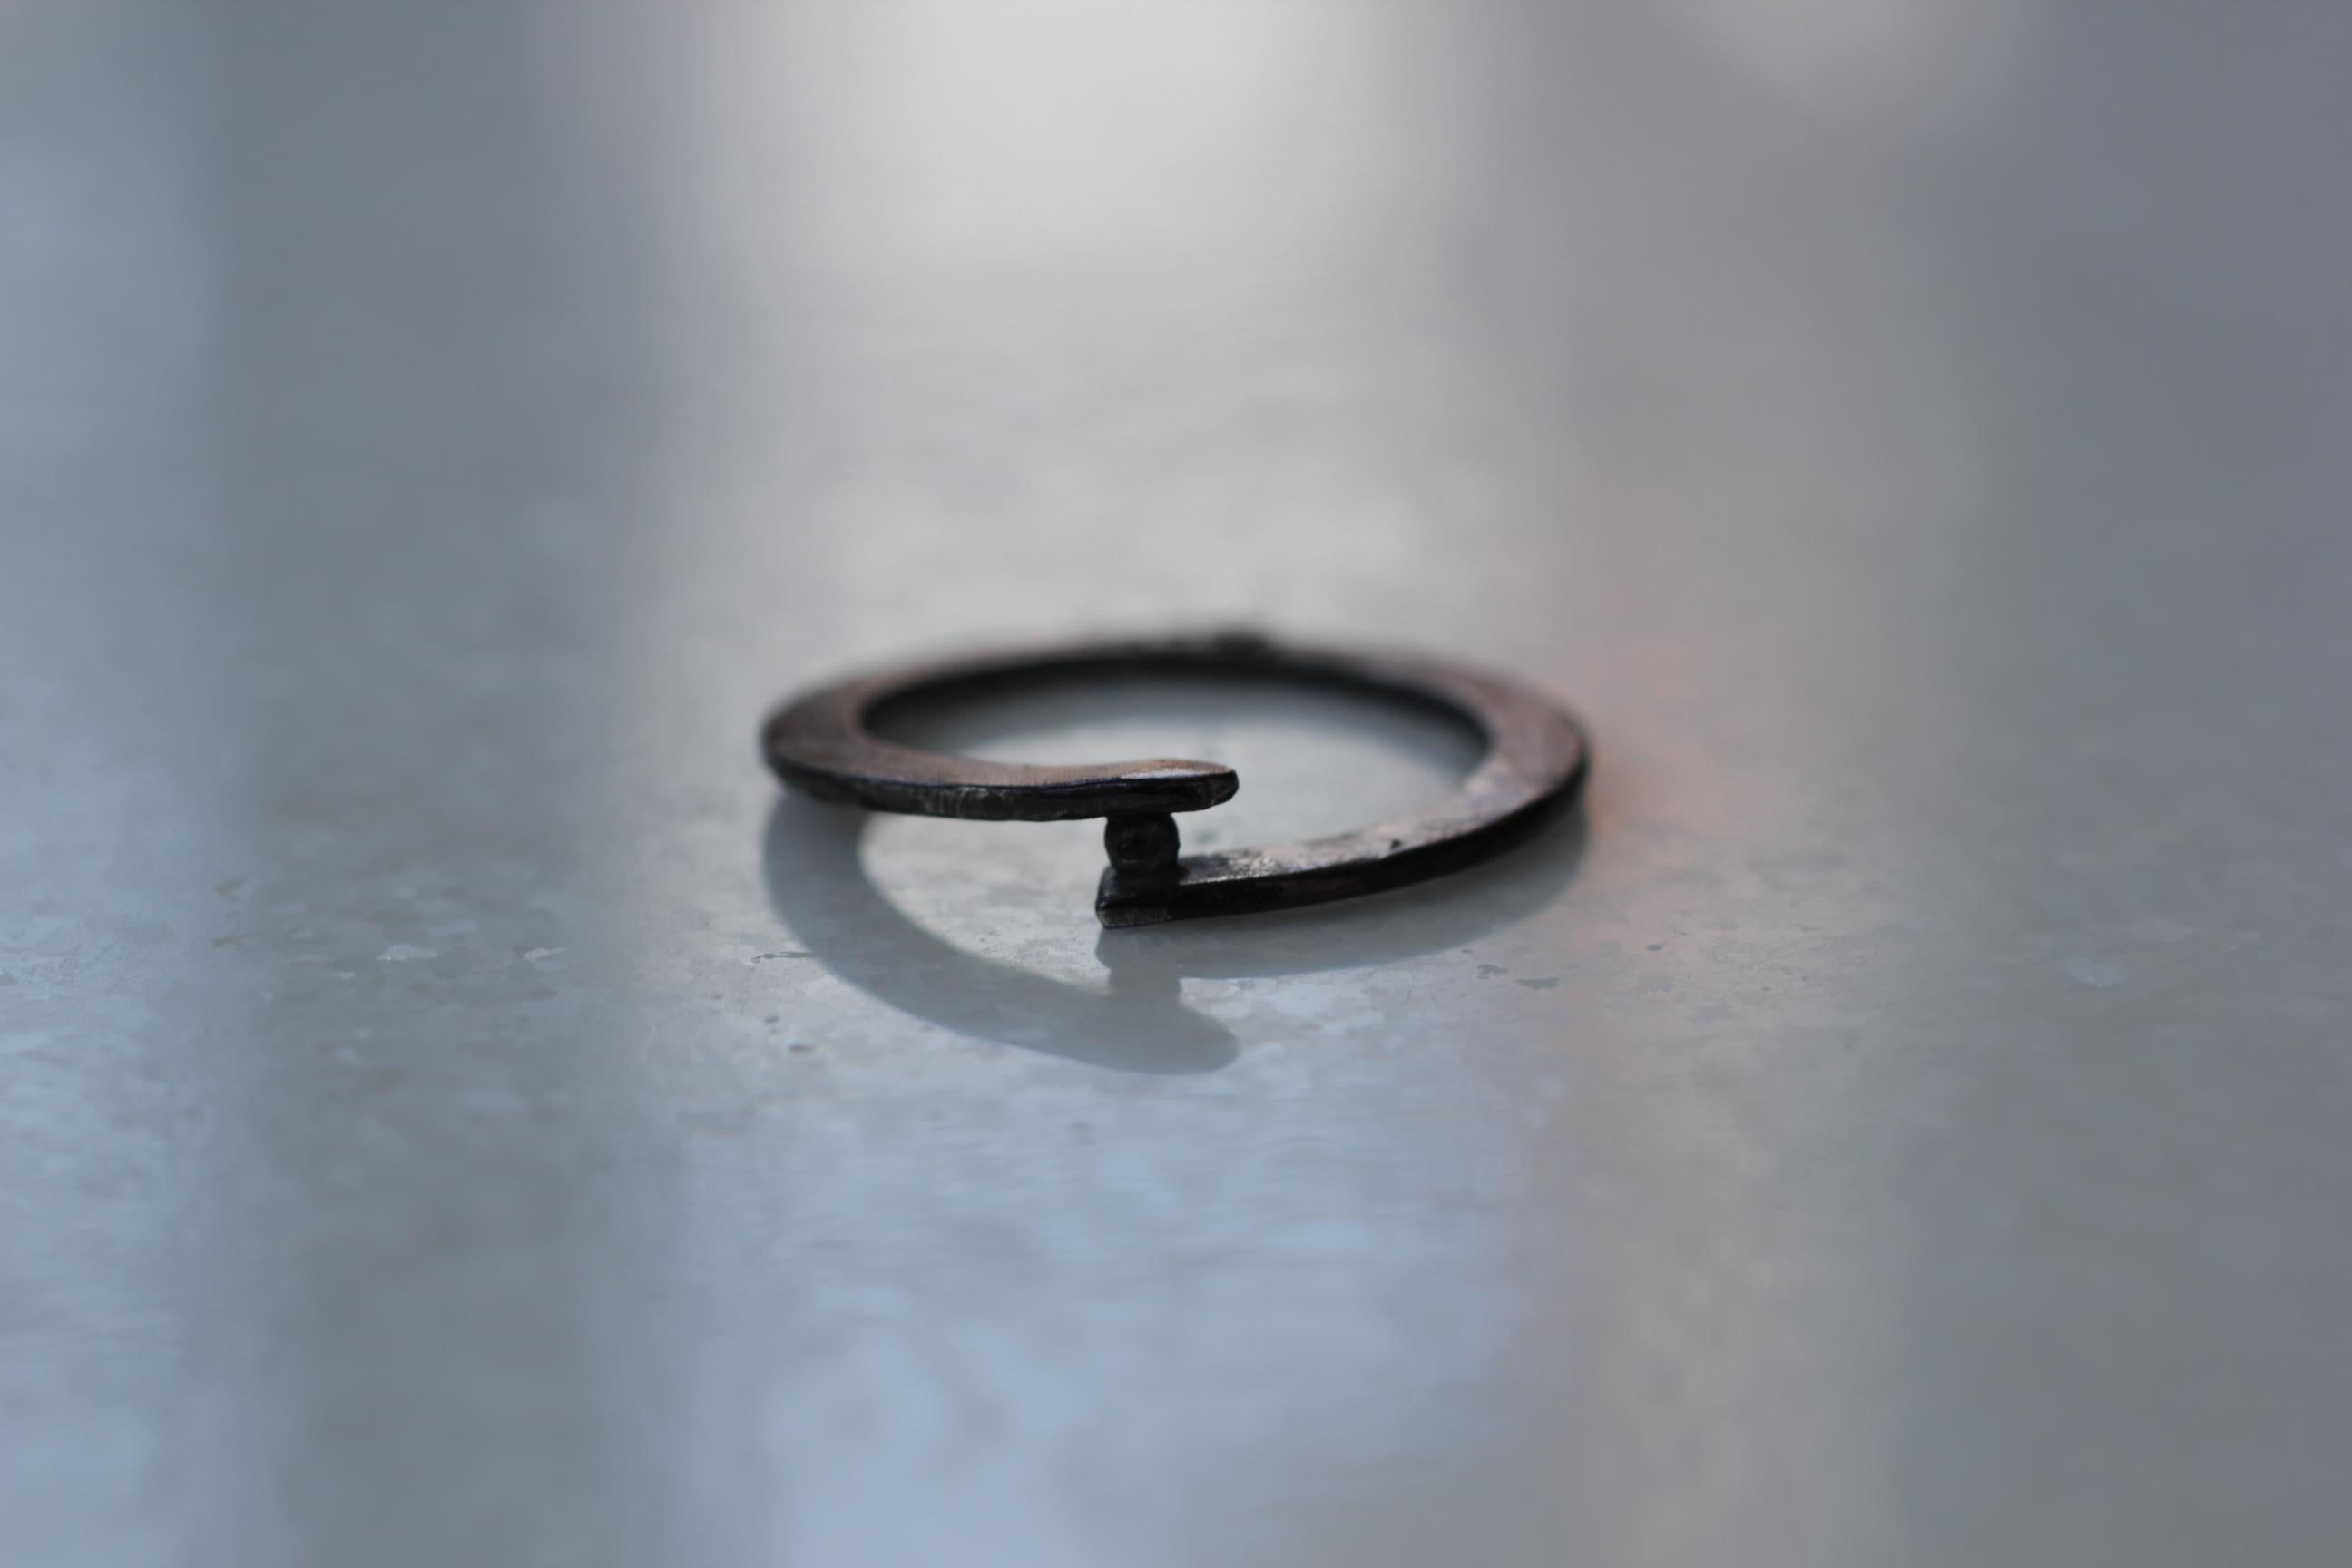 Simplicity With A Twist Holding One Granule, Modern design.

This listing is for a fashion ring in oxidized or blackened sterling silver, measuring 1mm wide by 3mm thick.

Process: This striking ring is first hand-forged in 21k gold, then cast in